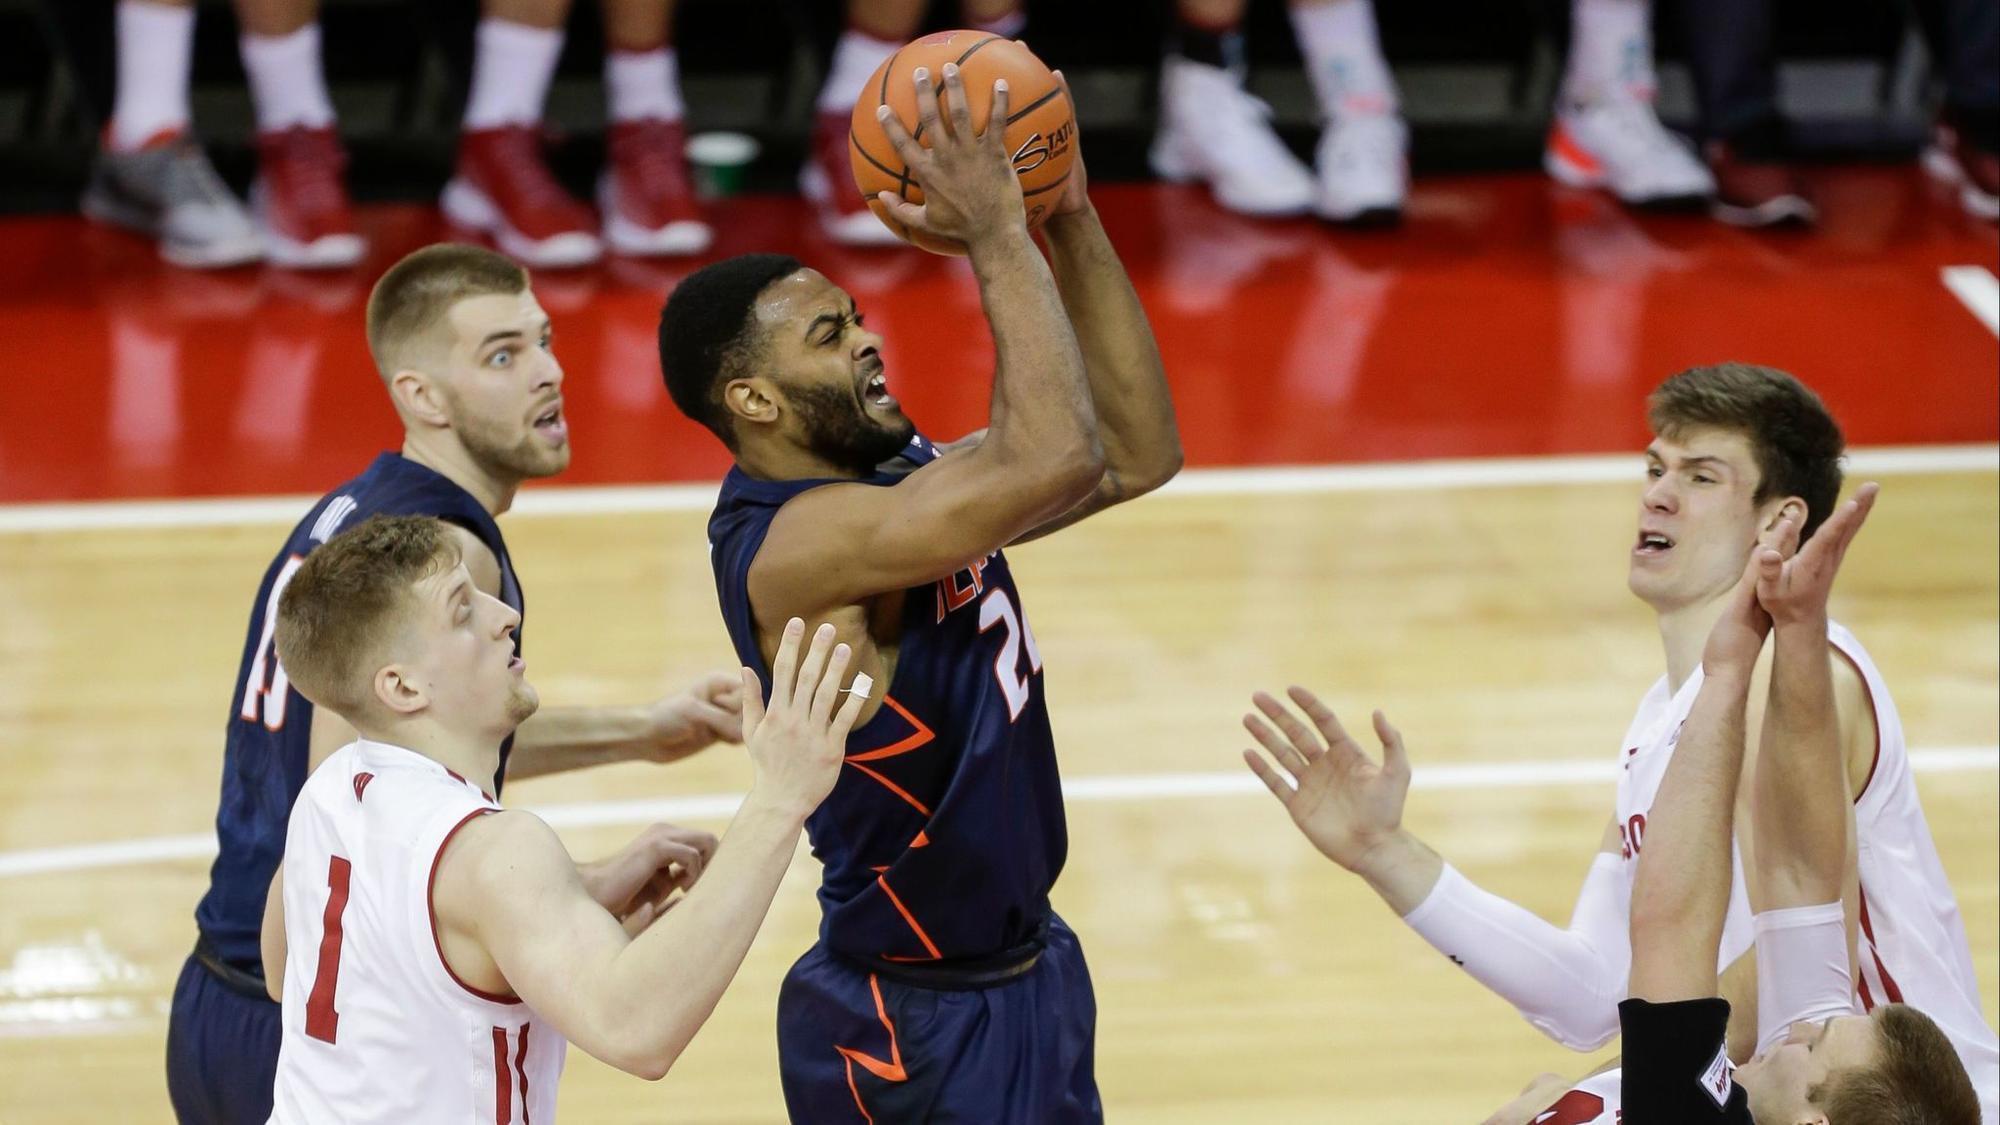 Illinois falls to 0-7 in Big Ten after getting blown out by Wisconsin